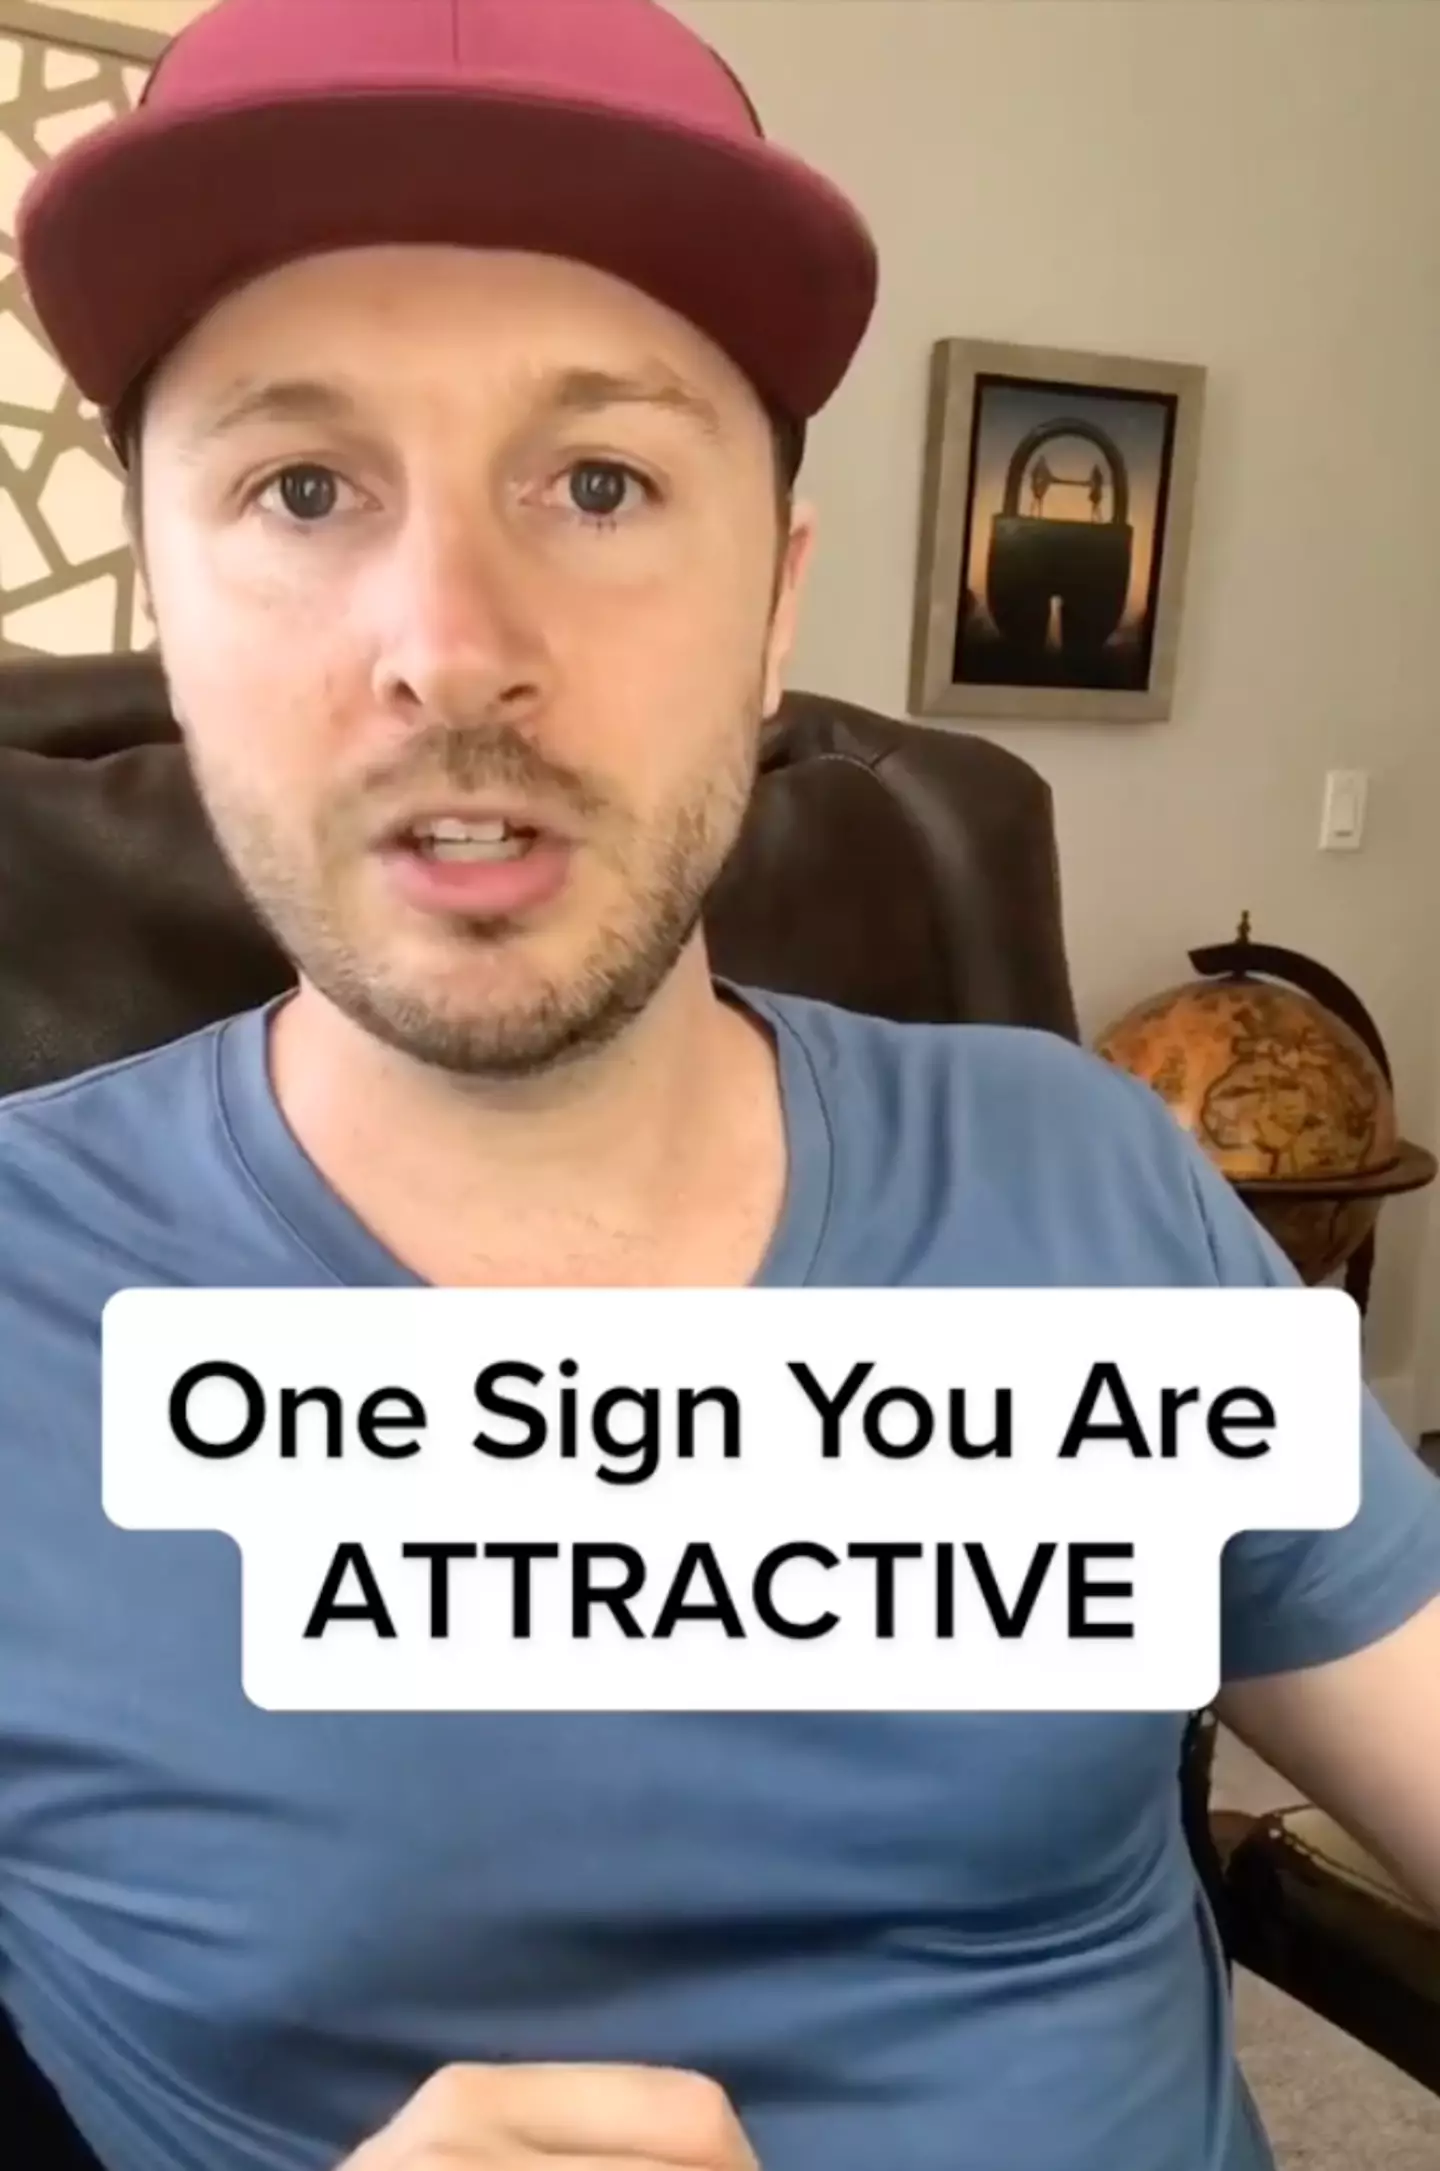 Brody has revealed the key sign to look out for to tell if someone is attracted to you.